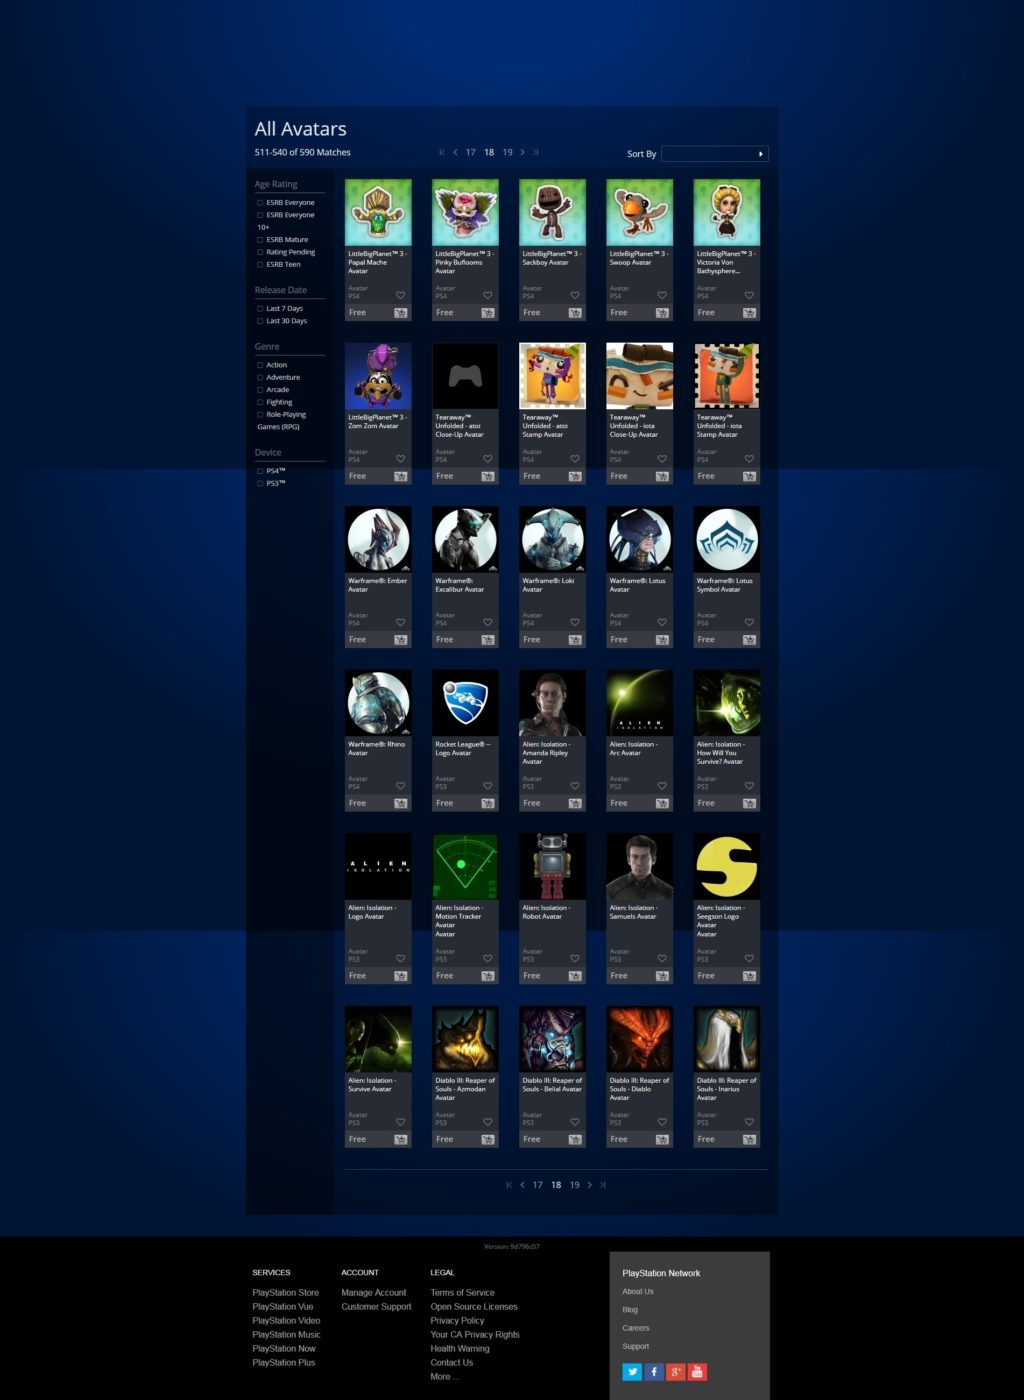 team Werkgever krijgen Here's the Complete 20-Page List of Free PS4 Avatars and How to Get Them All